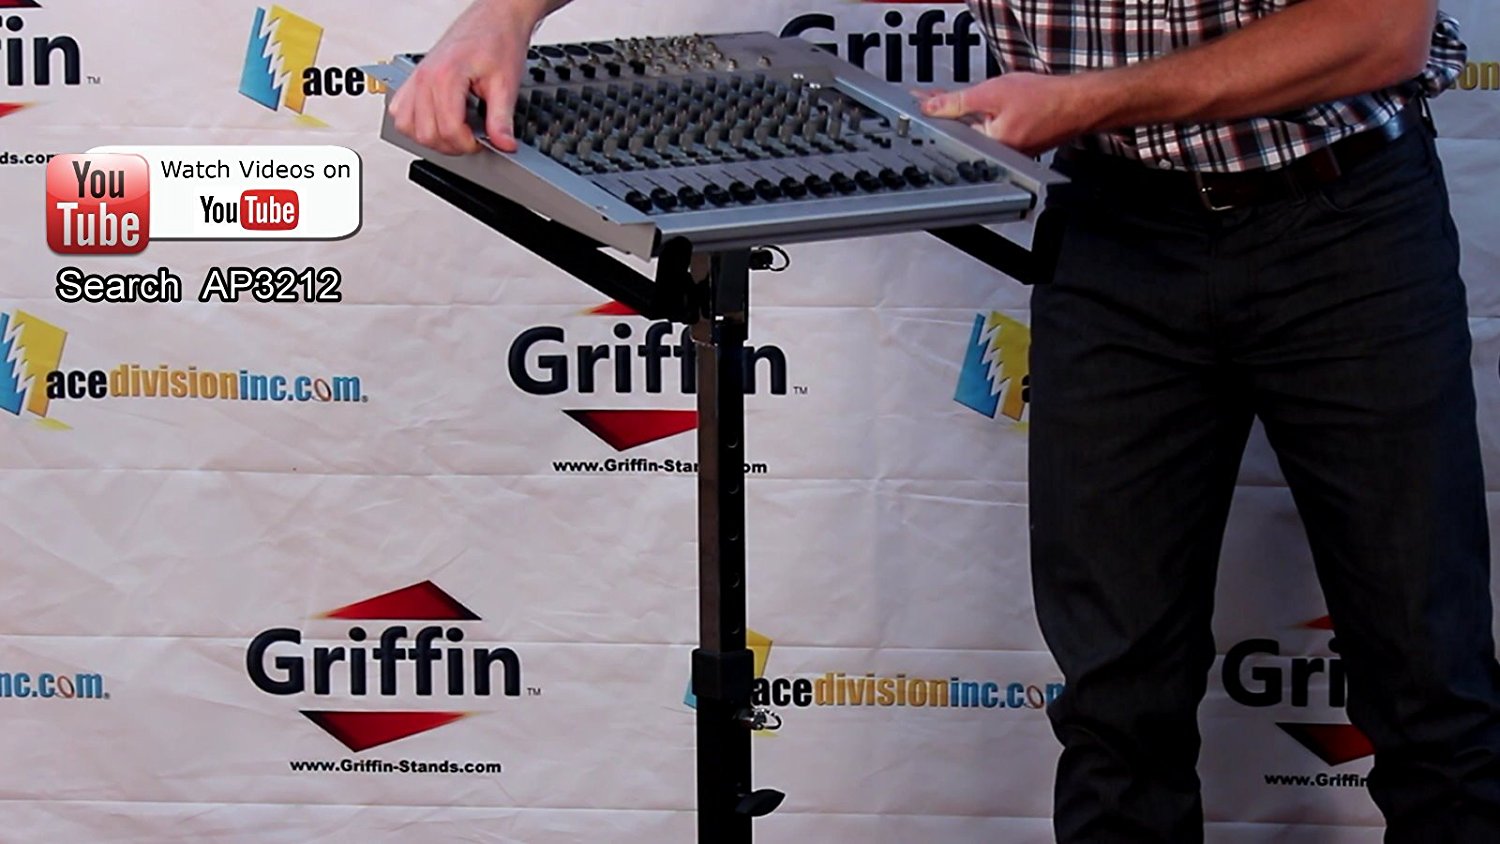 https://griffin-stands.com/wp-content/uploads/imported/Mobile-Studio-Mixer-Stand-DJ-Cart-by-Griffin-Rolling-Standing-Rack-On-Casters-with-Adjustable-HeightPortable-Turntabl-B004THB824-6.jpg